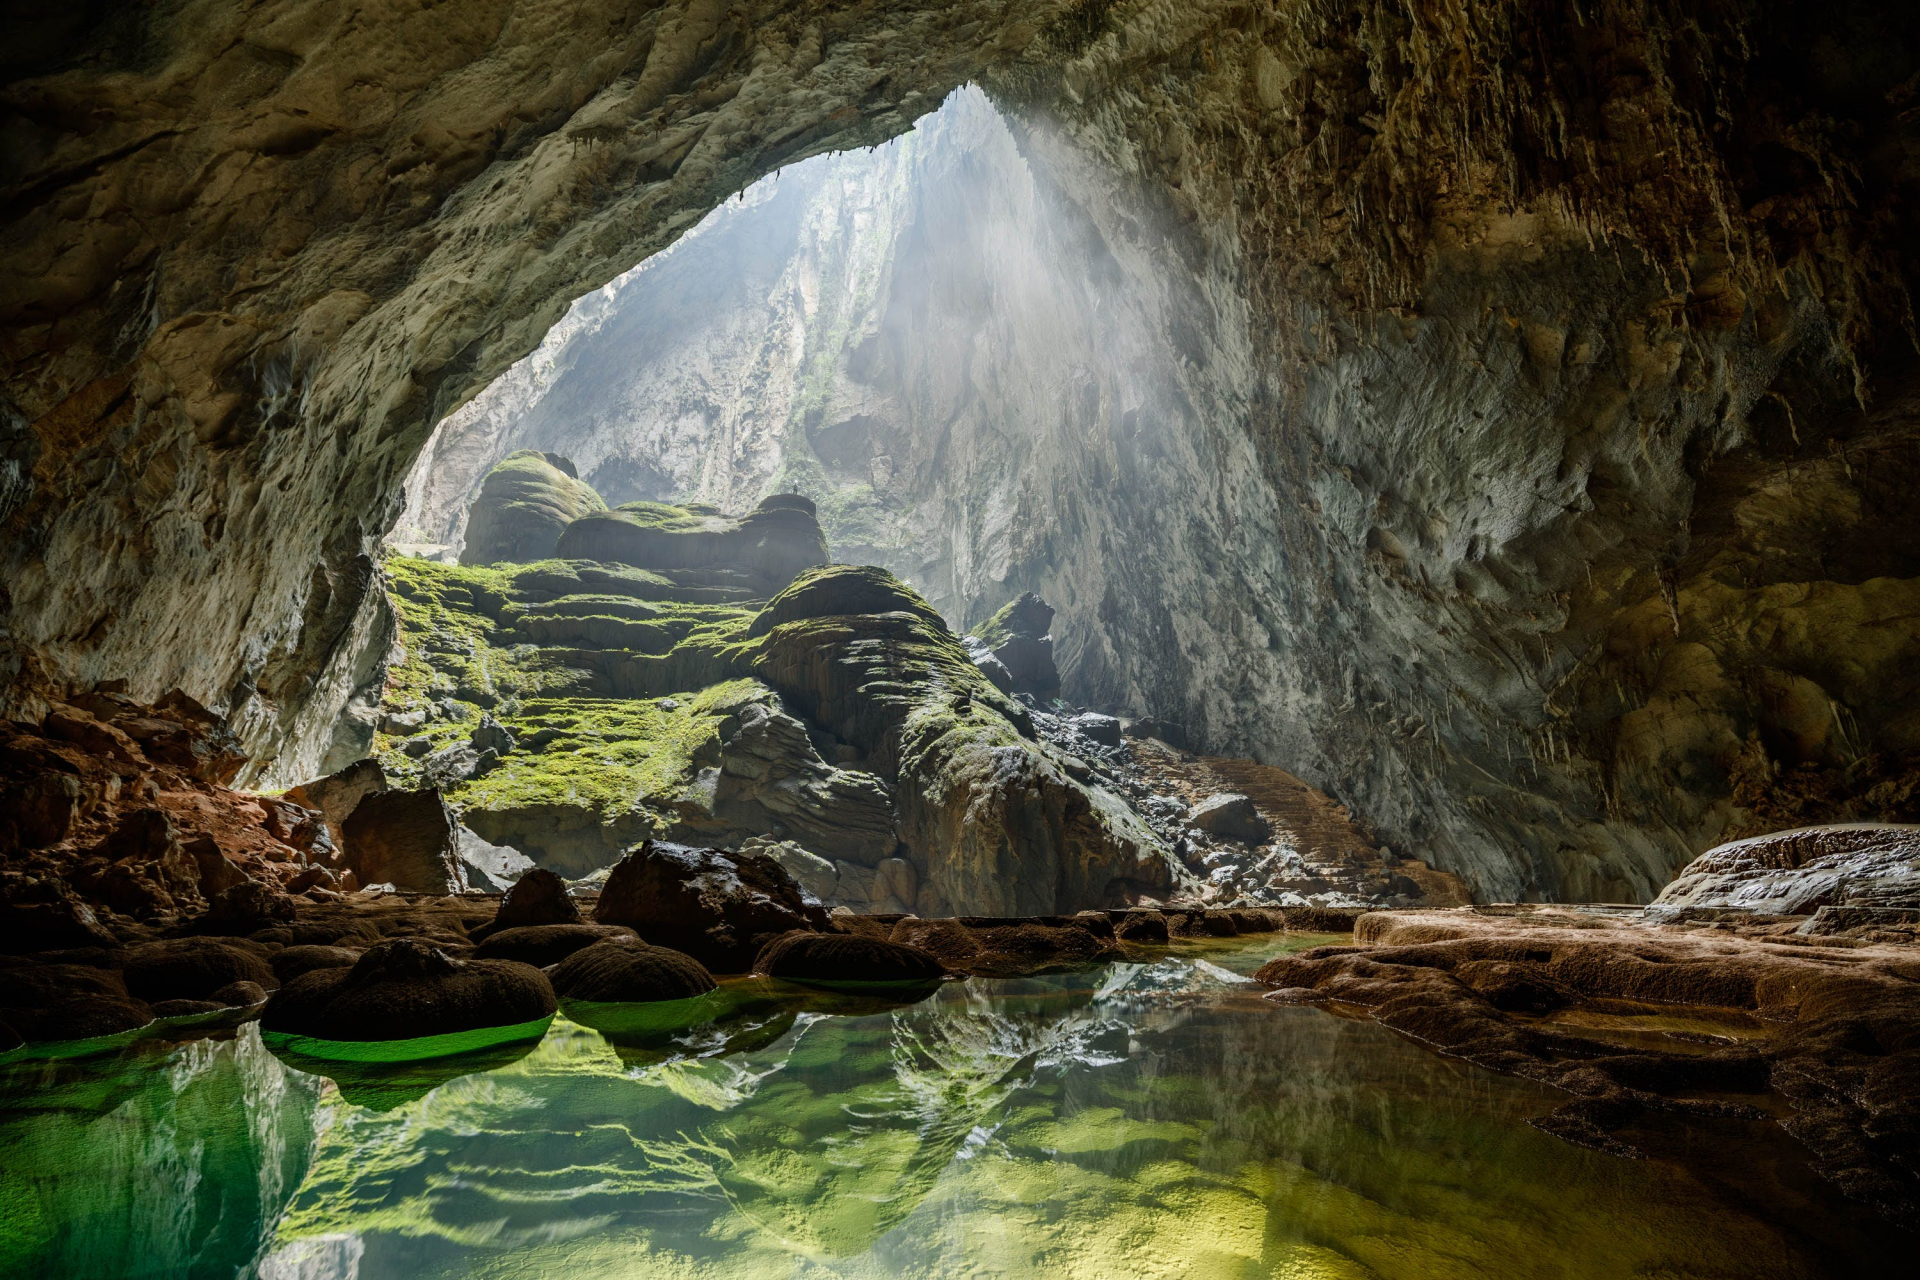 tours to son doong worlds largest cave in vietnam fully booked this year